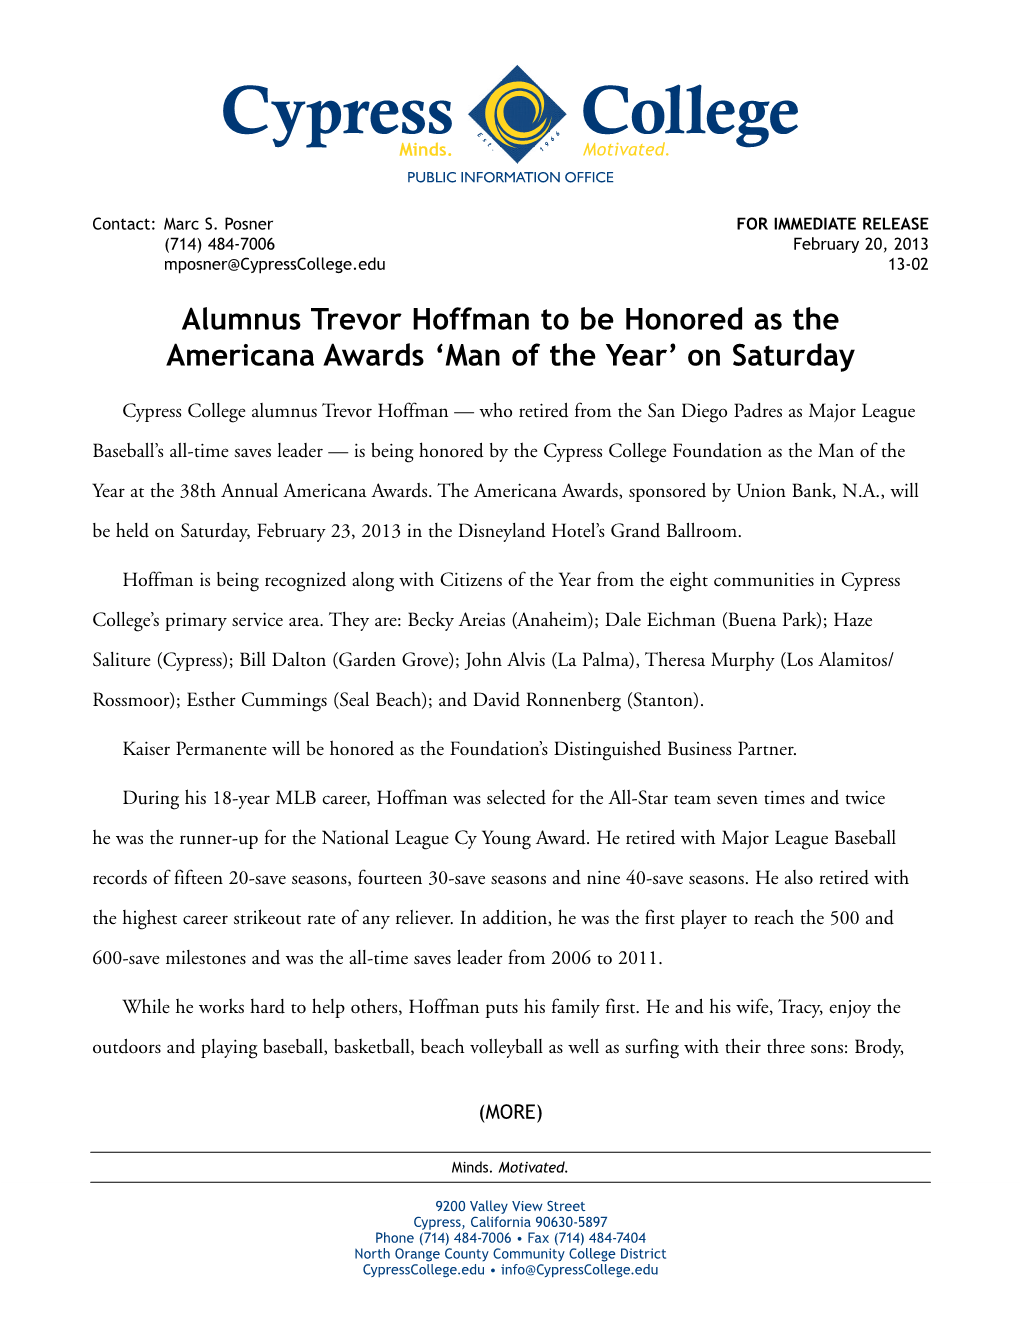 Alumnus Trevor Hoffman to Be Honored As the Americana Awards ‘Man of the Year’ on Saturday